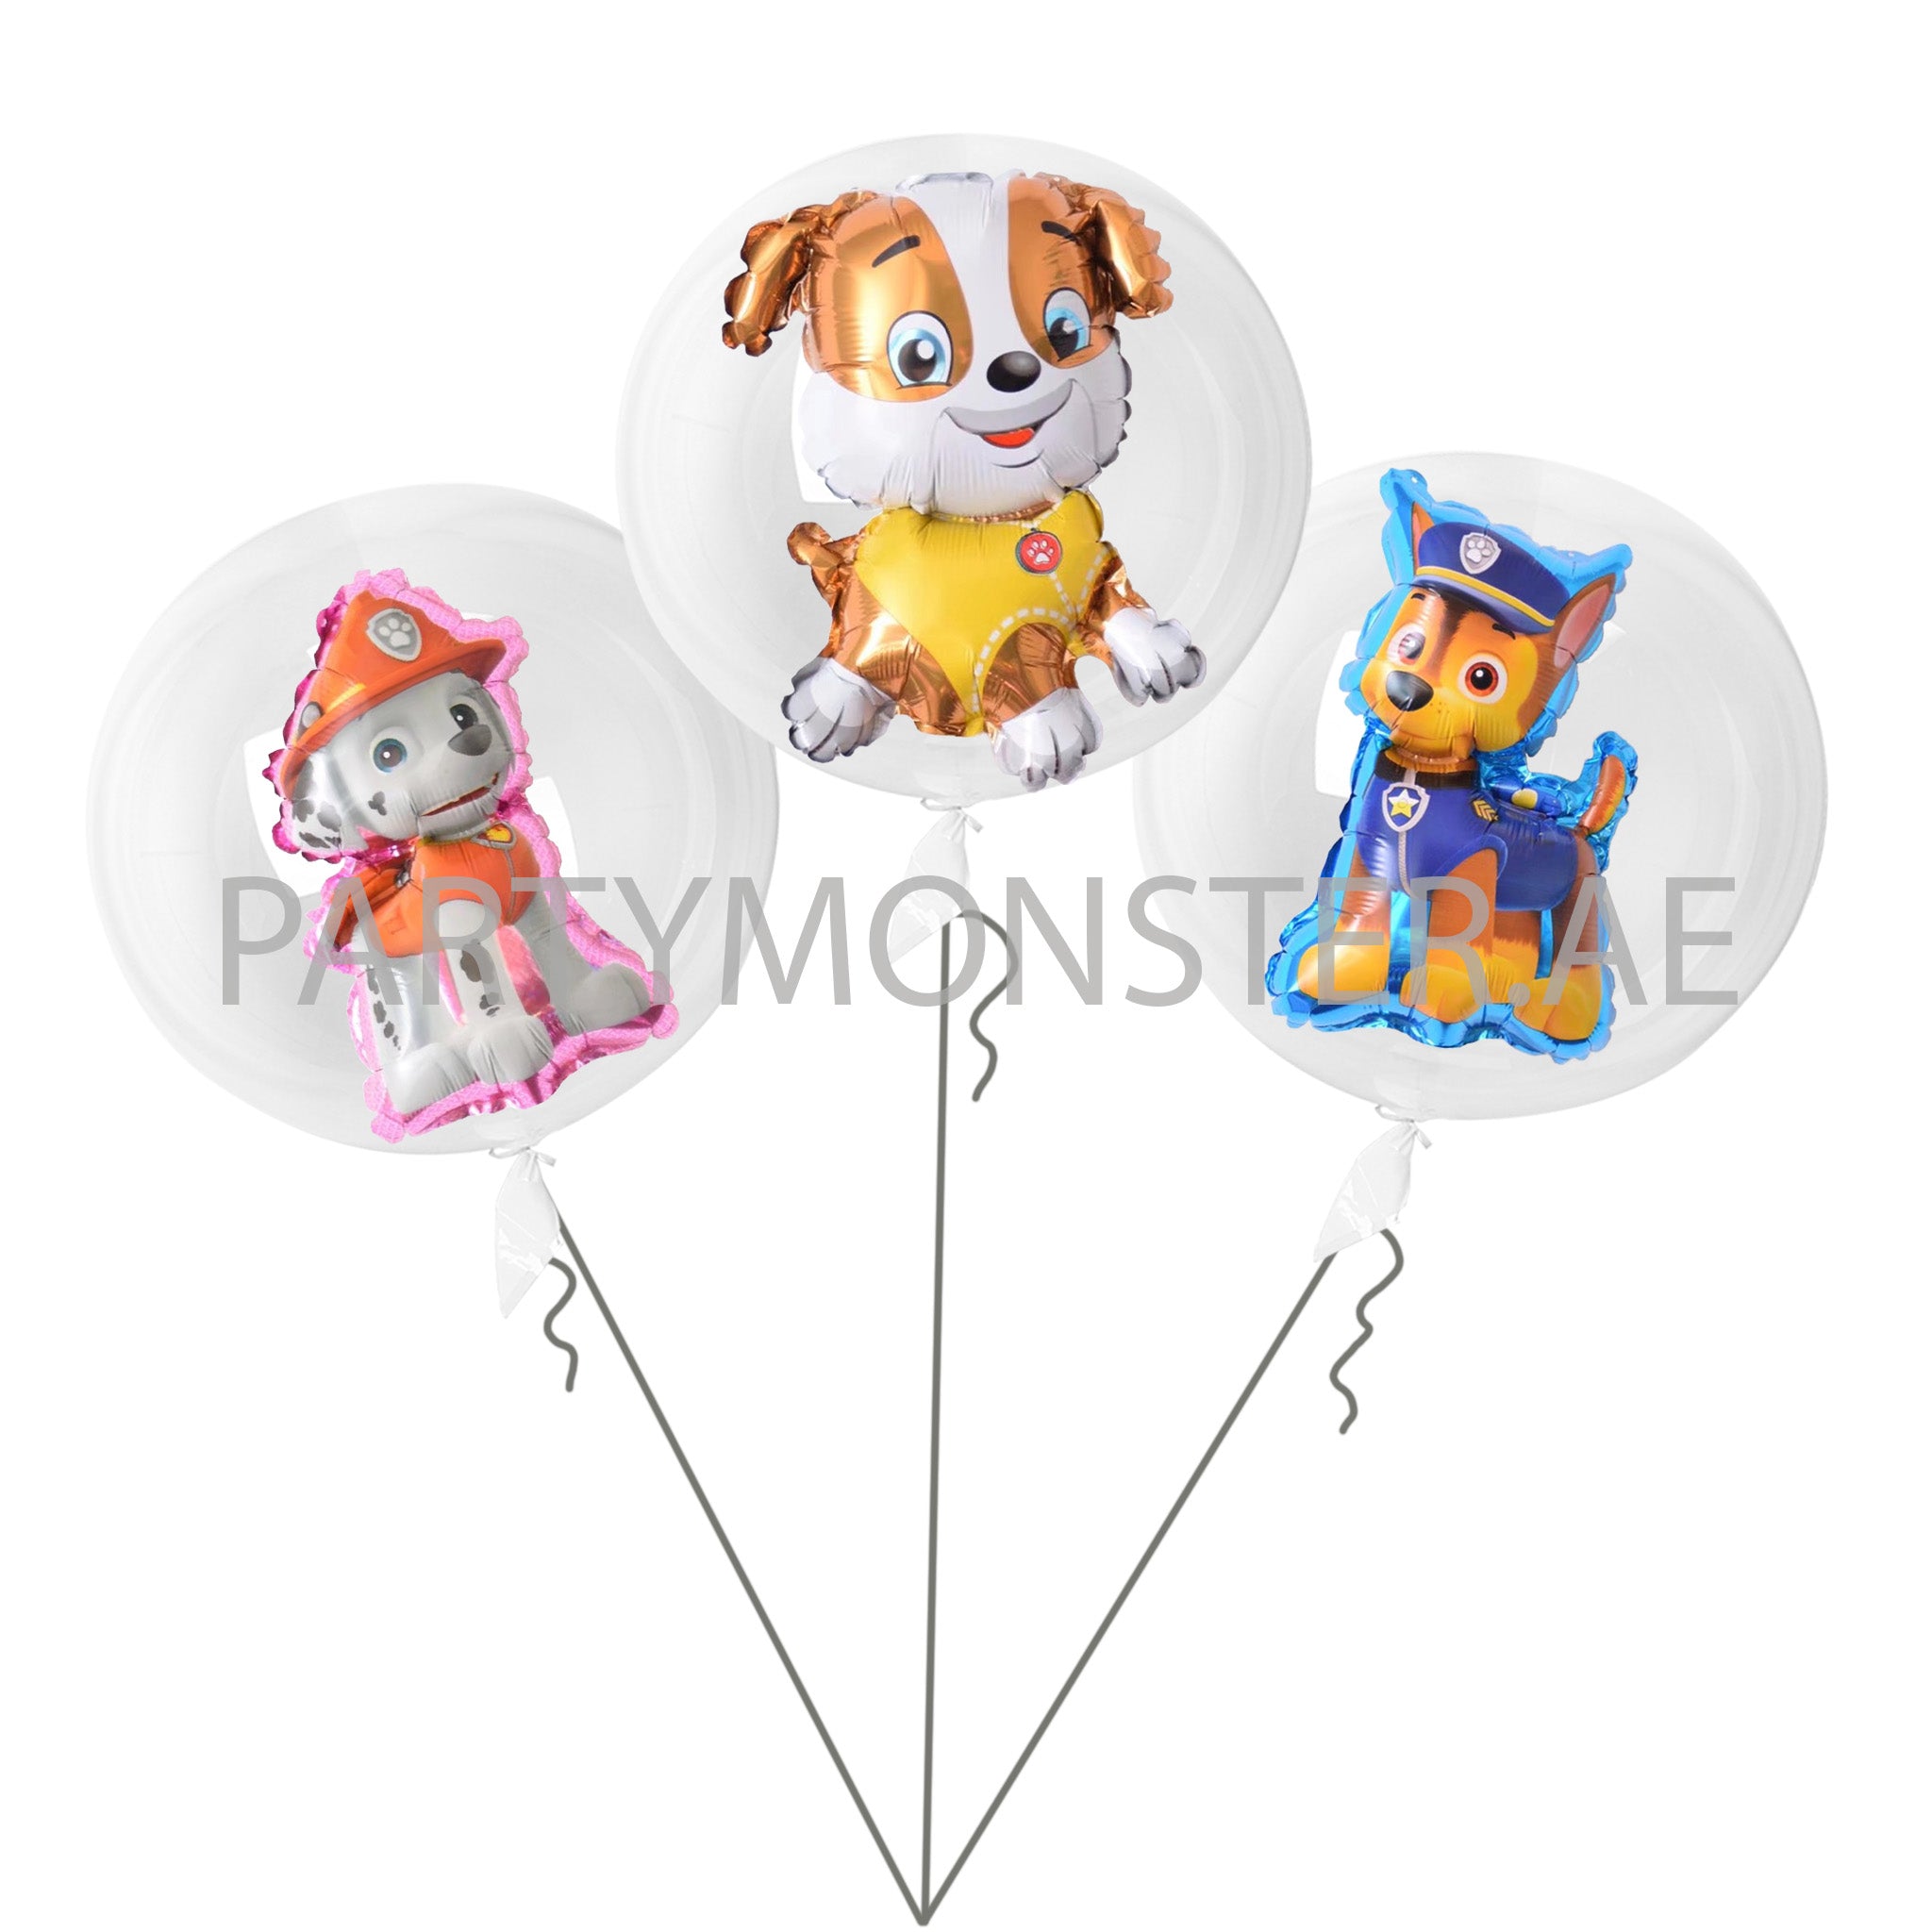 Paw Patrol balloons Bouquet for sale online in Dubai